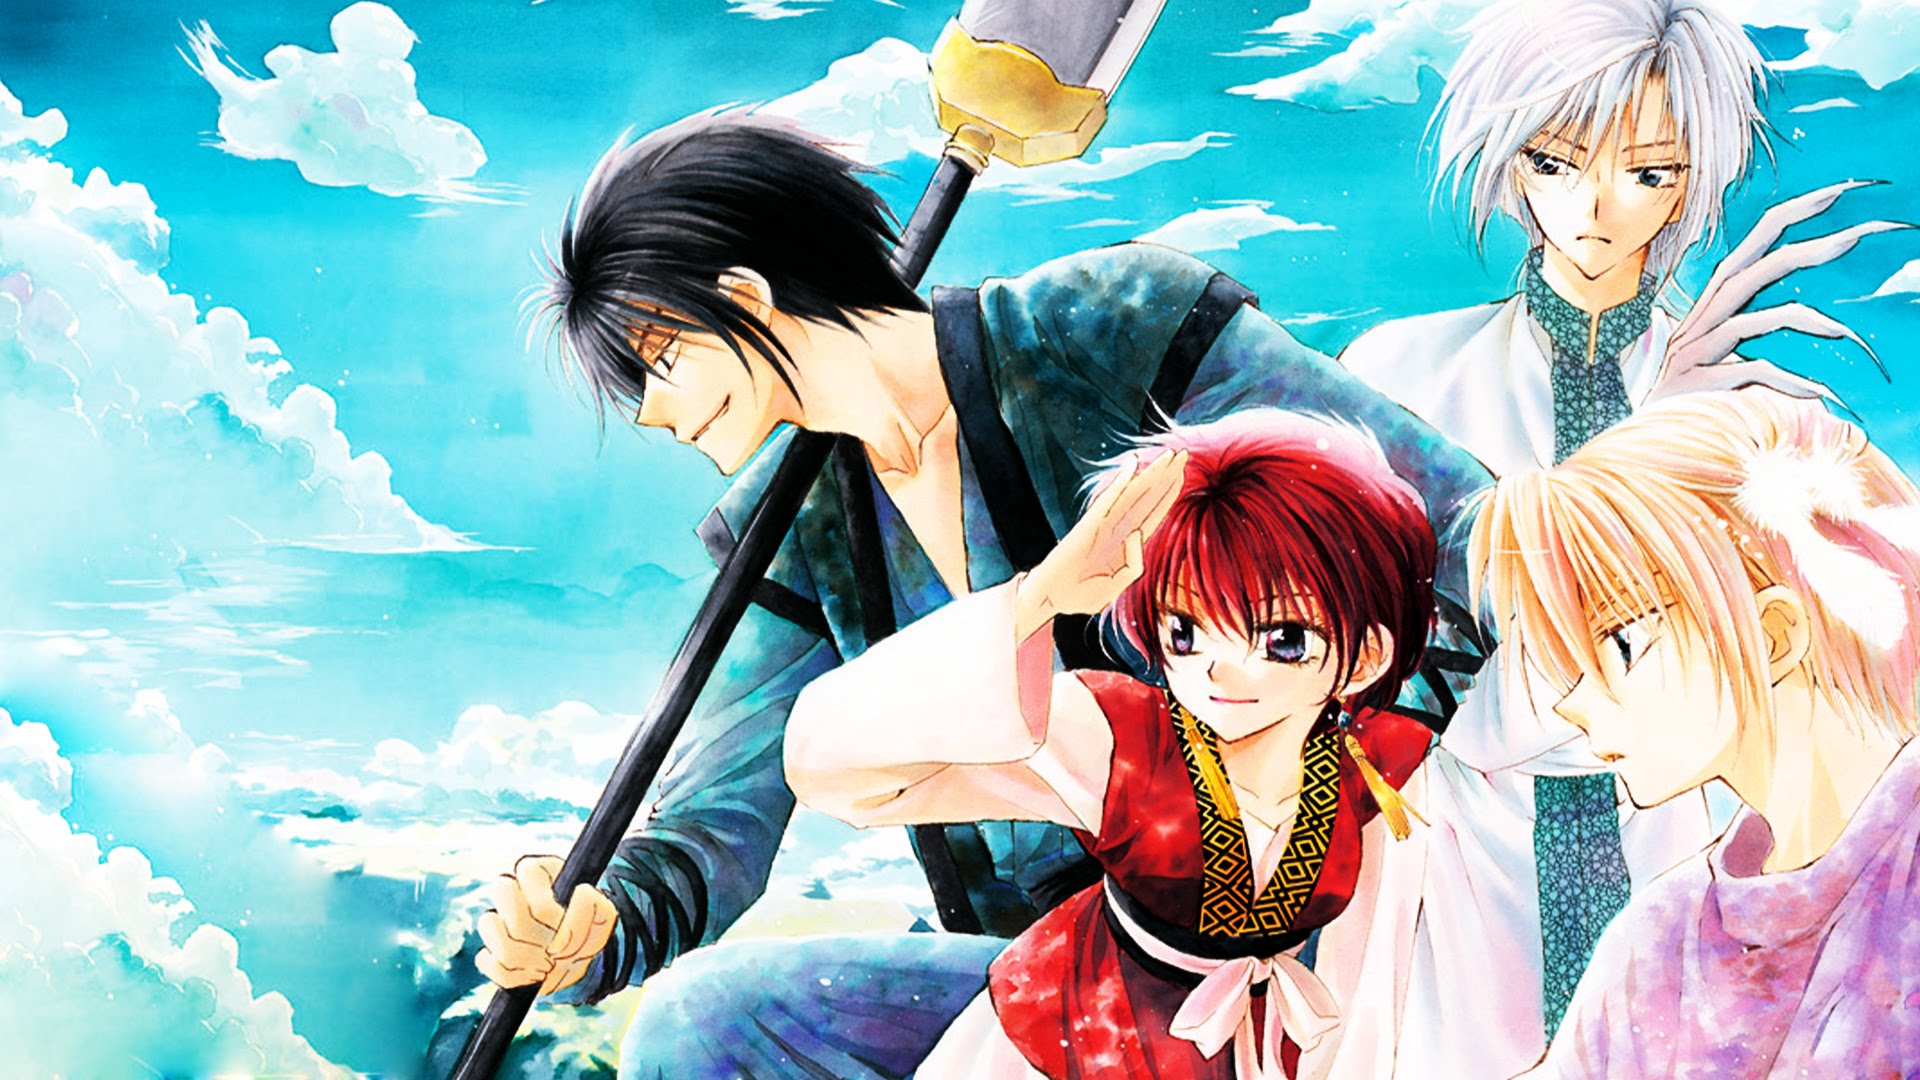 Anime Yona Of The Dawn Wallpapers